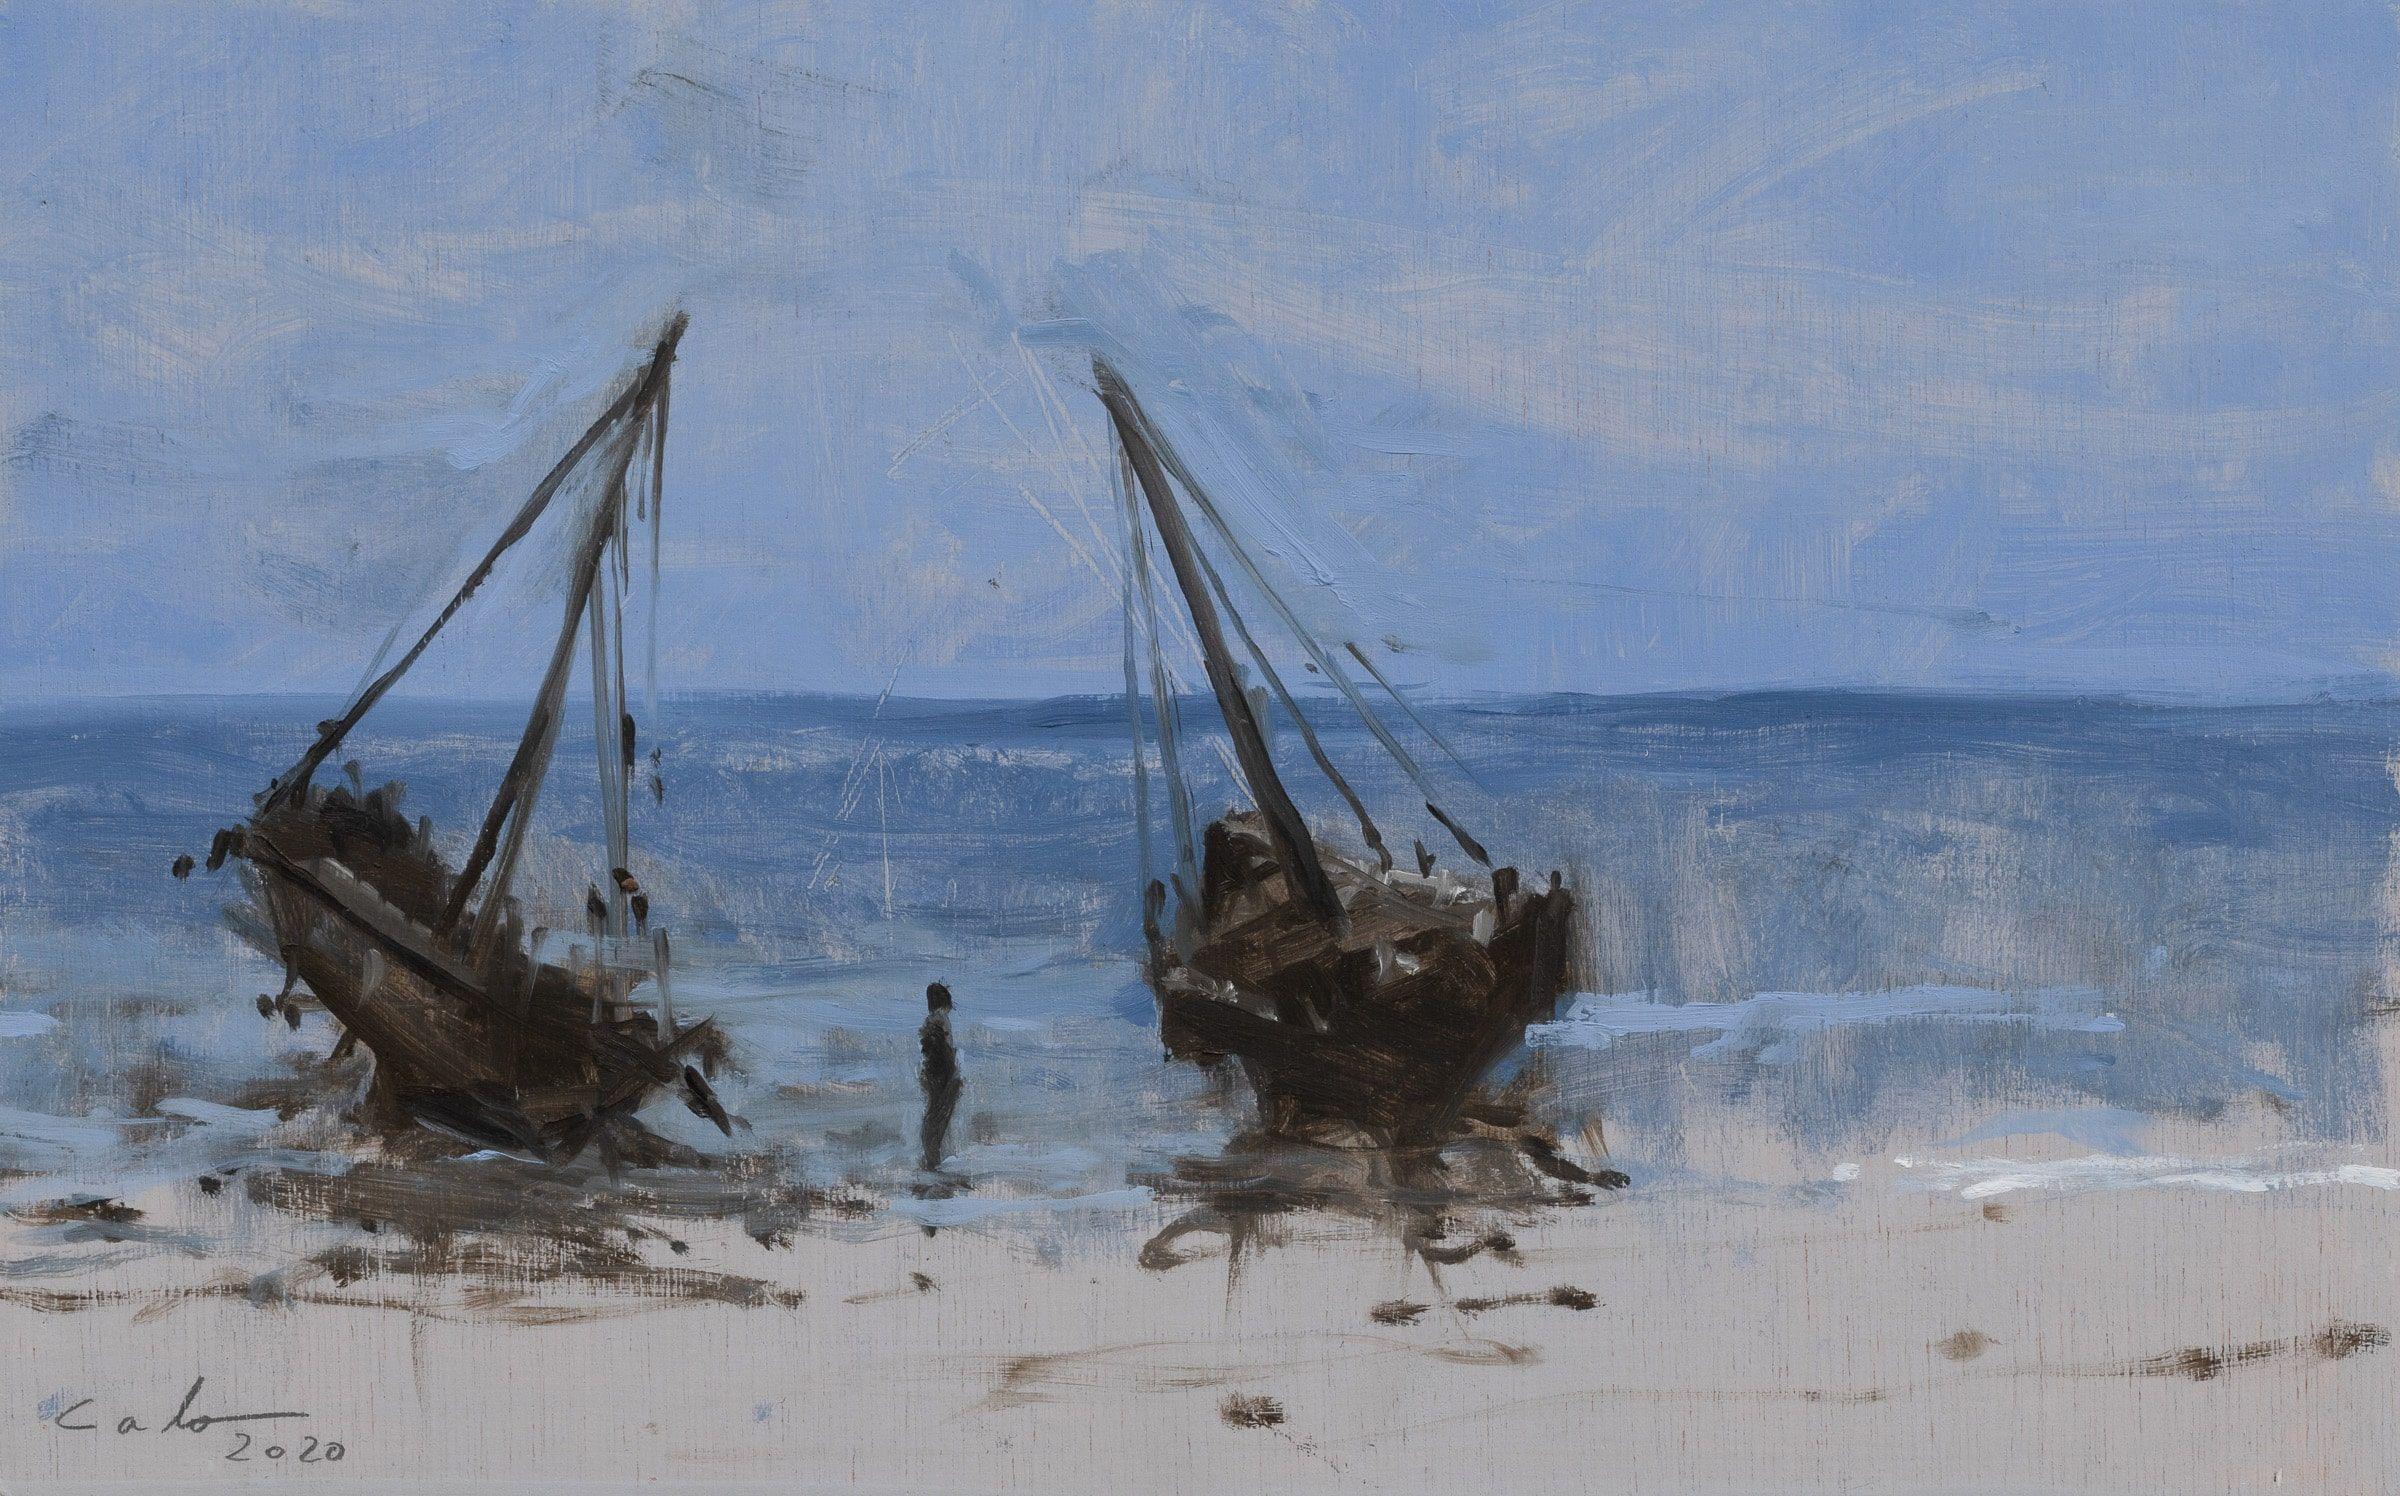 Marinas No. 12, oil painting on wood panel by Spanish contemporary artist Calo Carratalá. 22 cm × 35 cm.
This landscape painting takes the viewer to the coasts of Tanzania on the Indian Ocean, the source of the artist's inspiration. It is part of